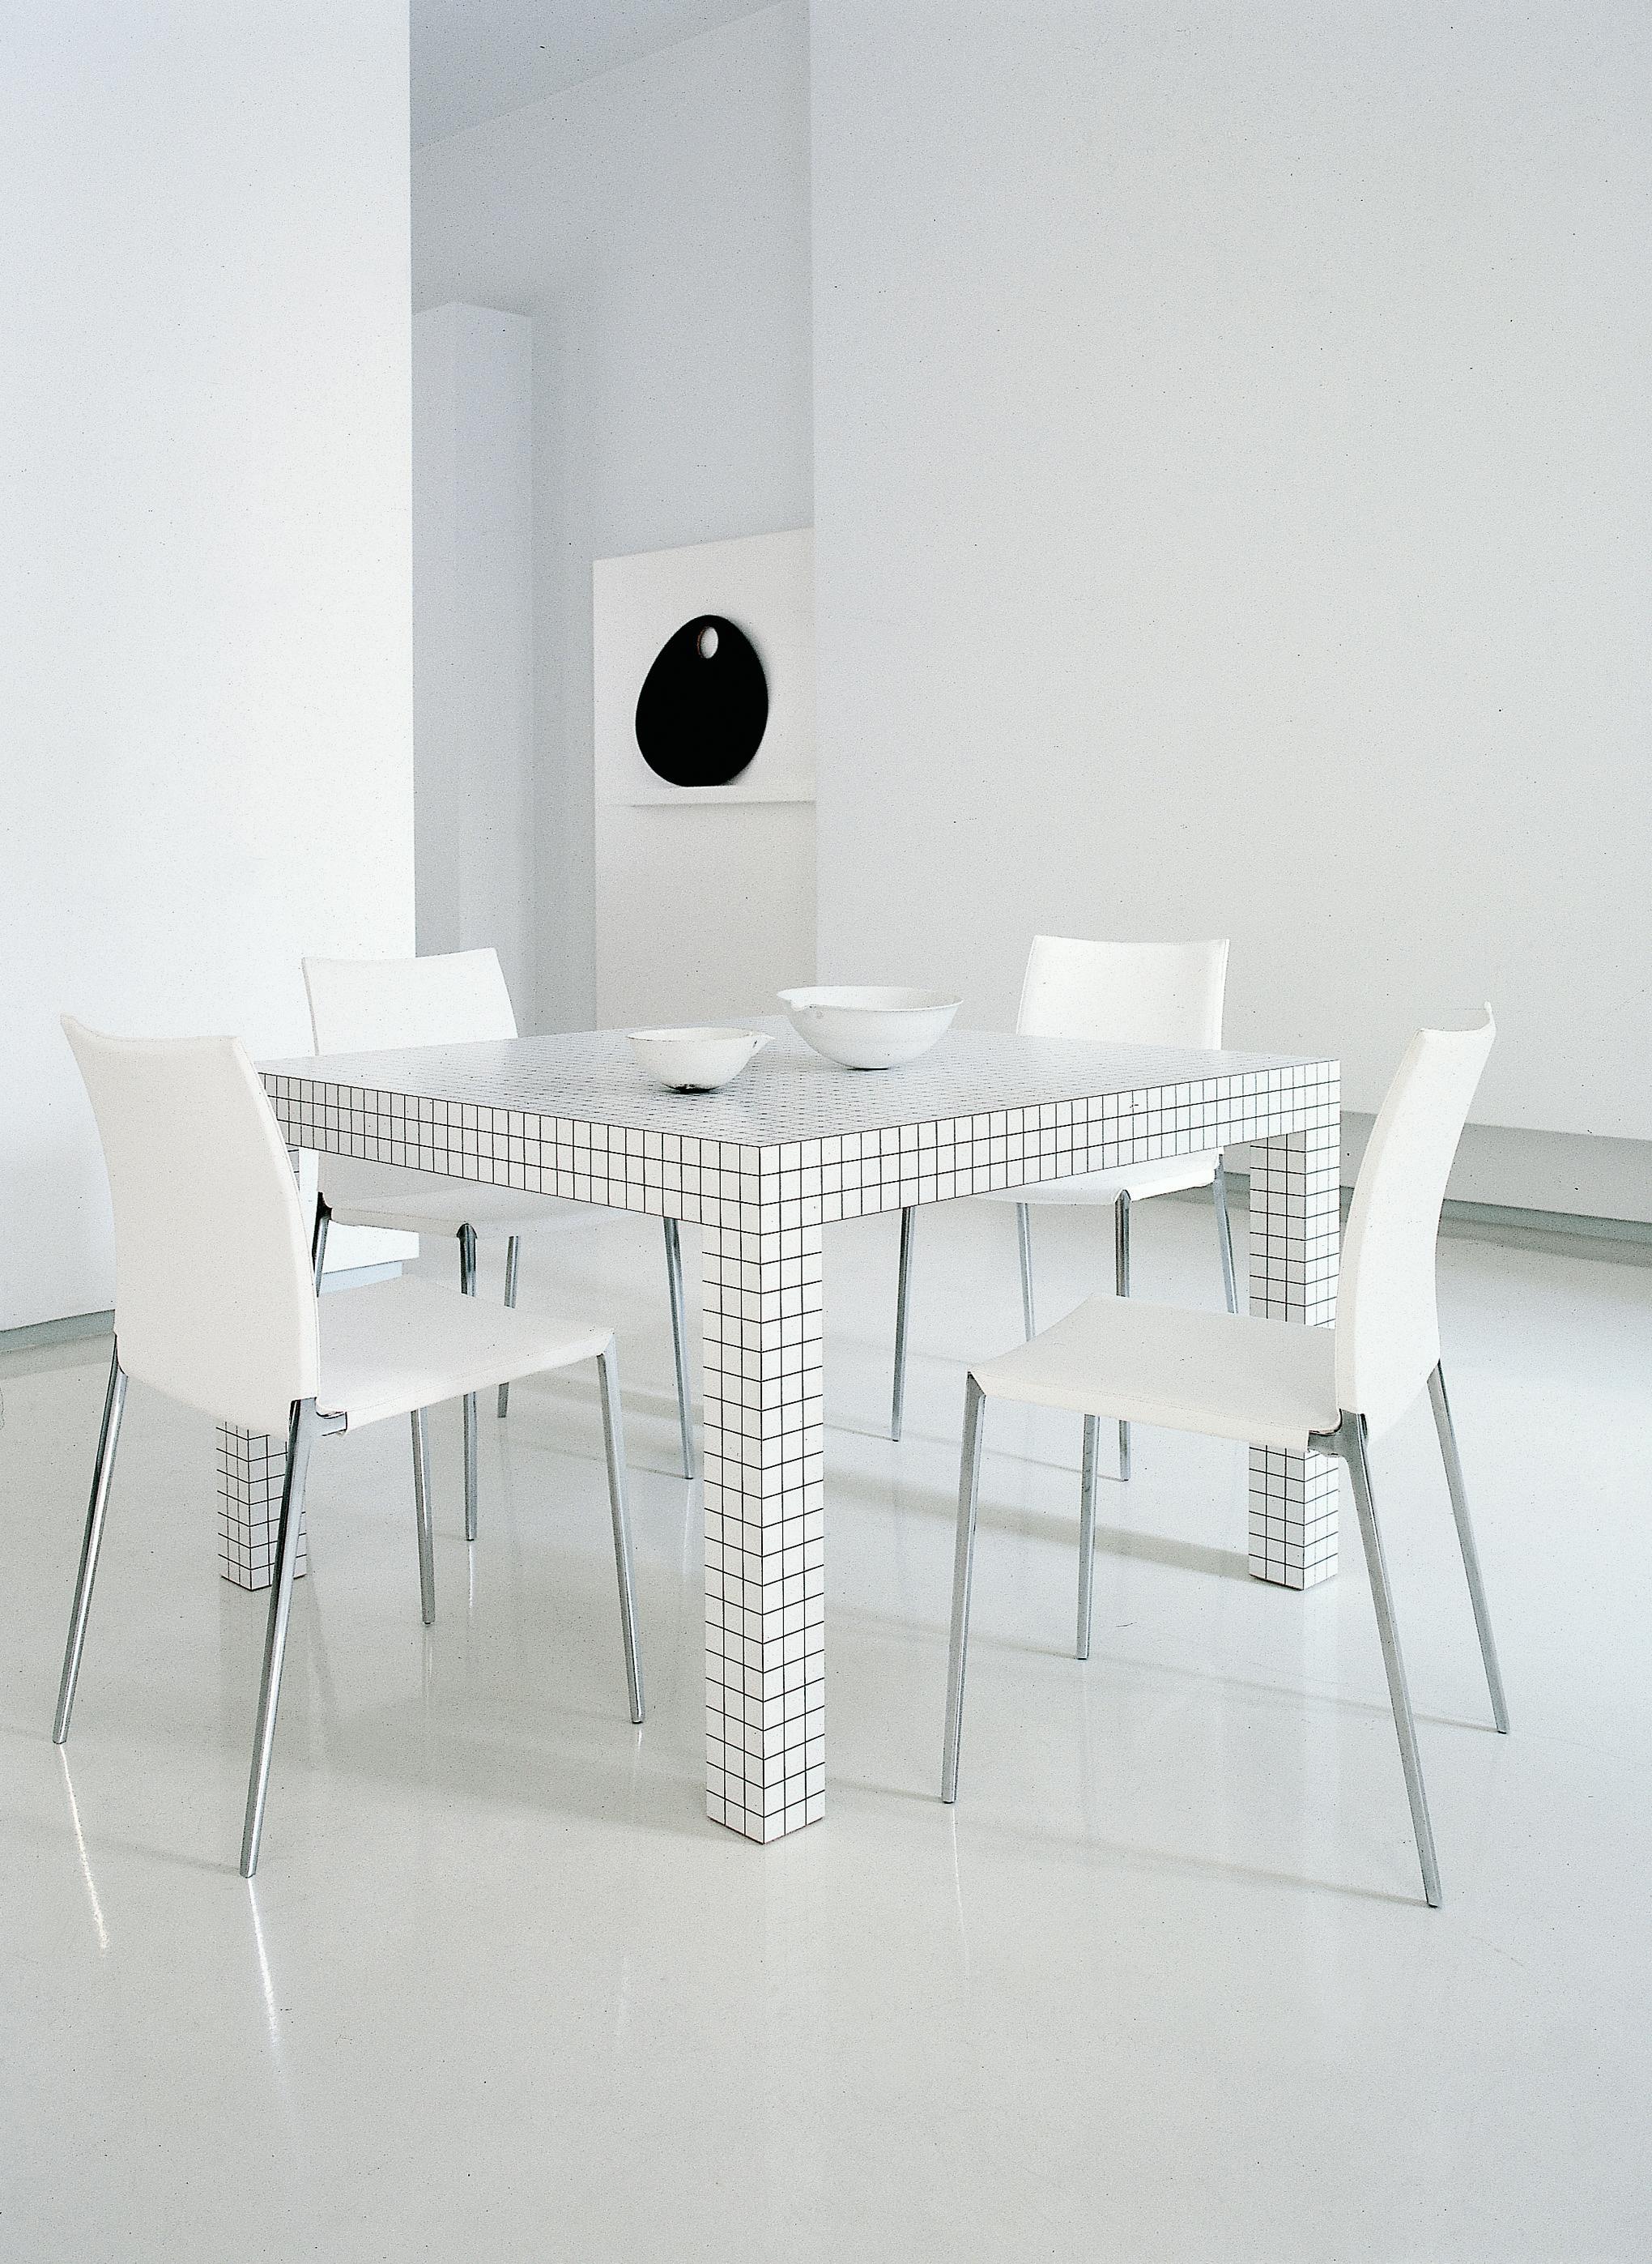 Zanotta Medium Quaderna Table/Writing Desk in White Plastic by Superstudio

Honeycomb core structure coated with white plastic laminate, digitally printed with black squares at 1 3/16” spacing.

Additional Information:
Material: Plastic